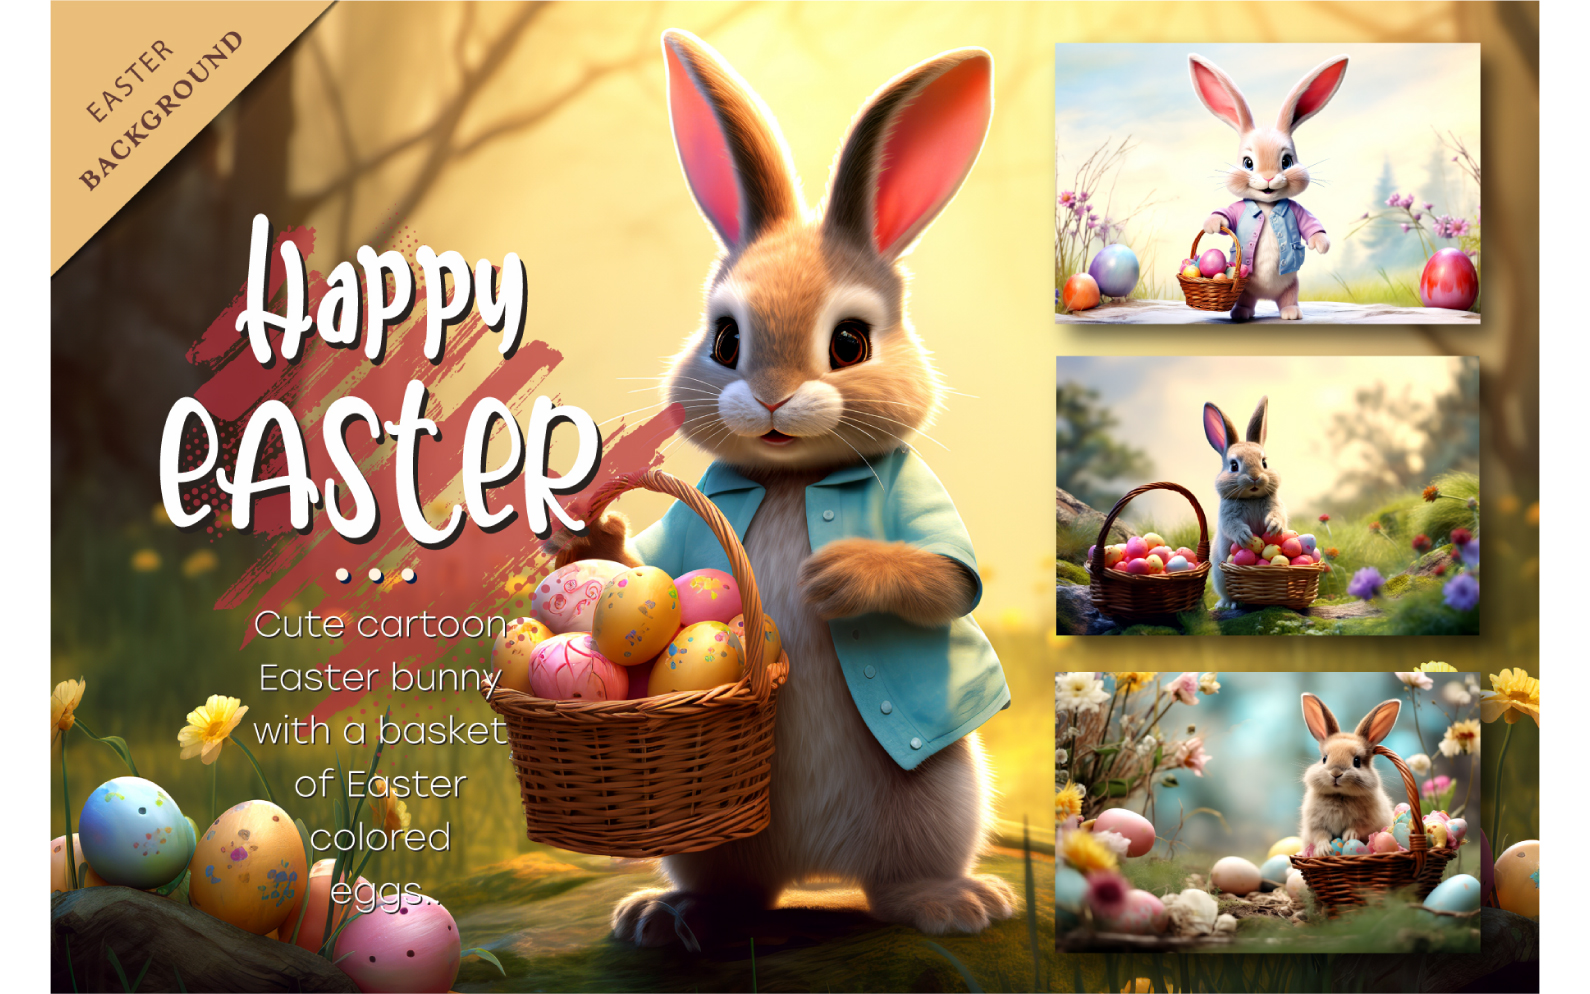 Cute Easter bunny. Easter background.